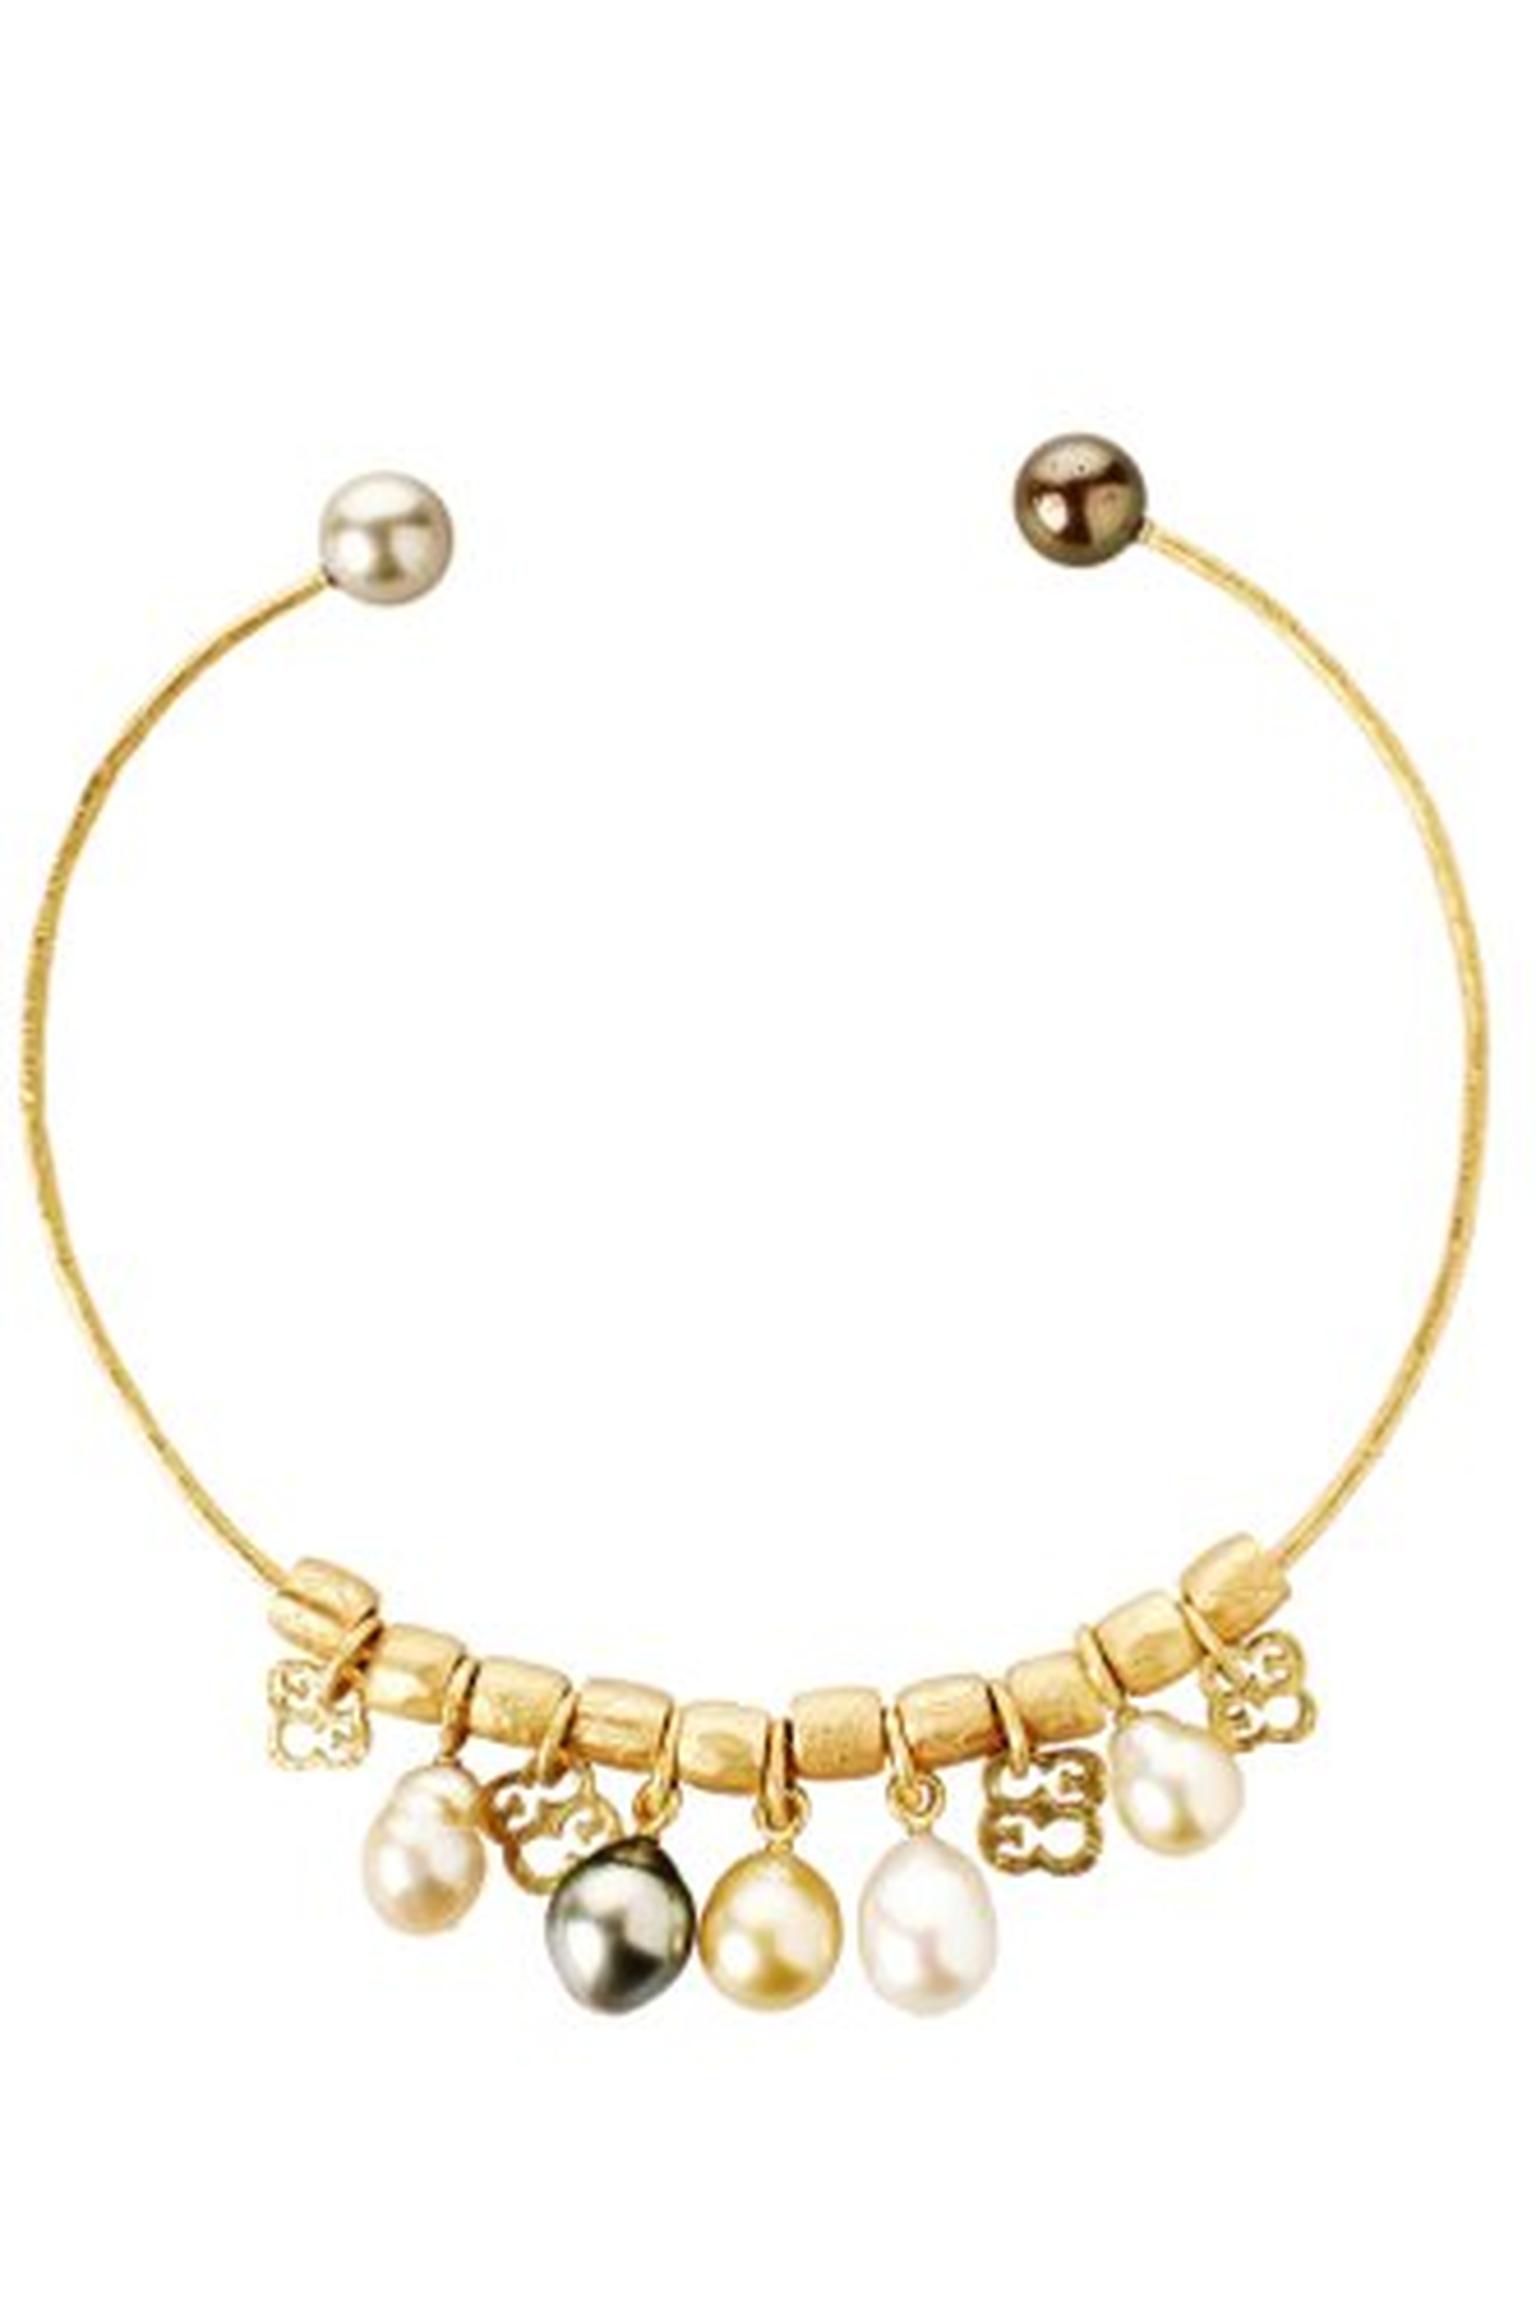 16) Gold choker with charms and pearls.jpg